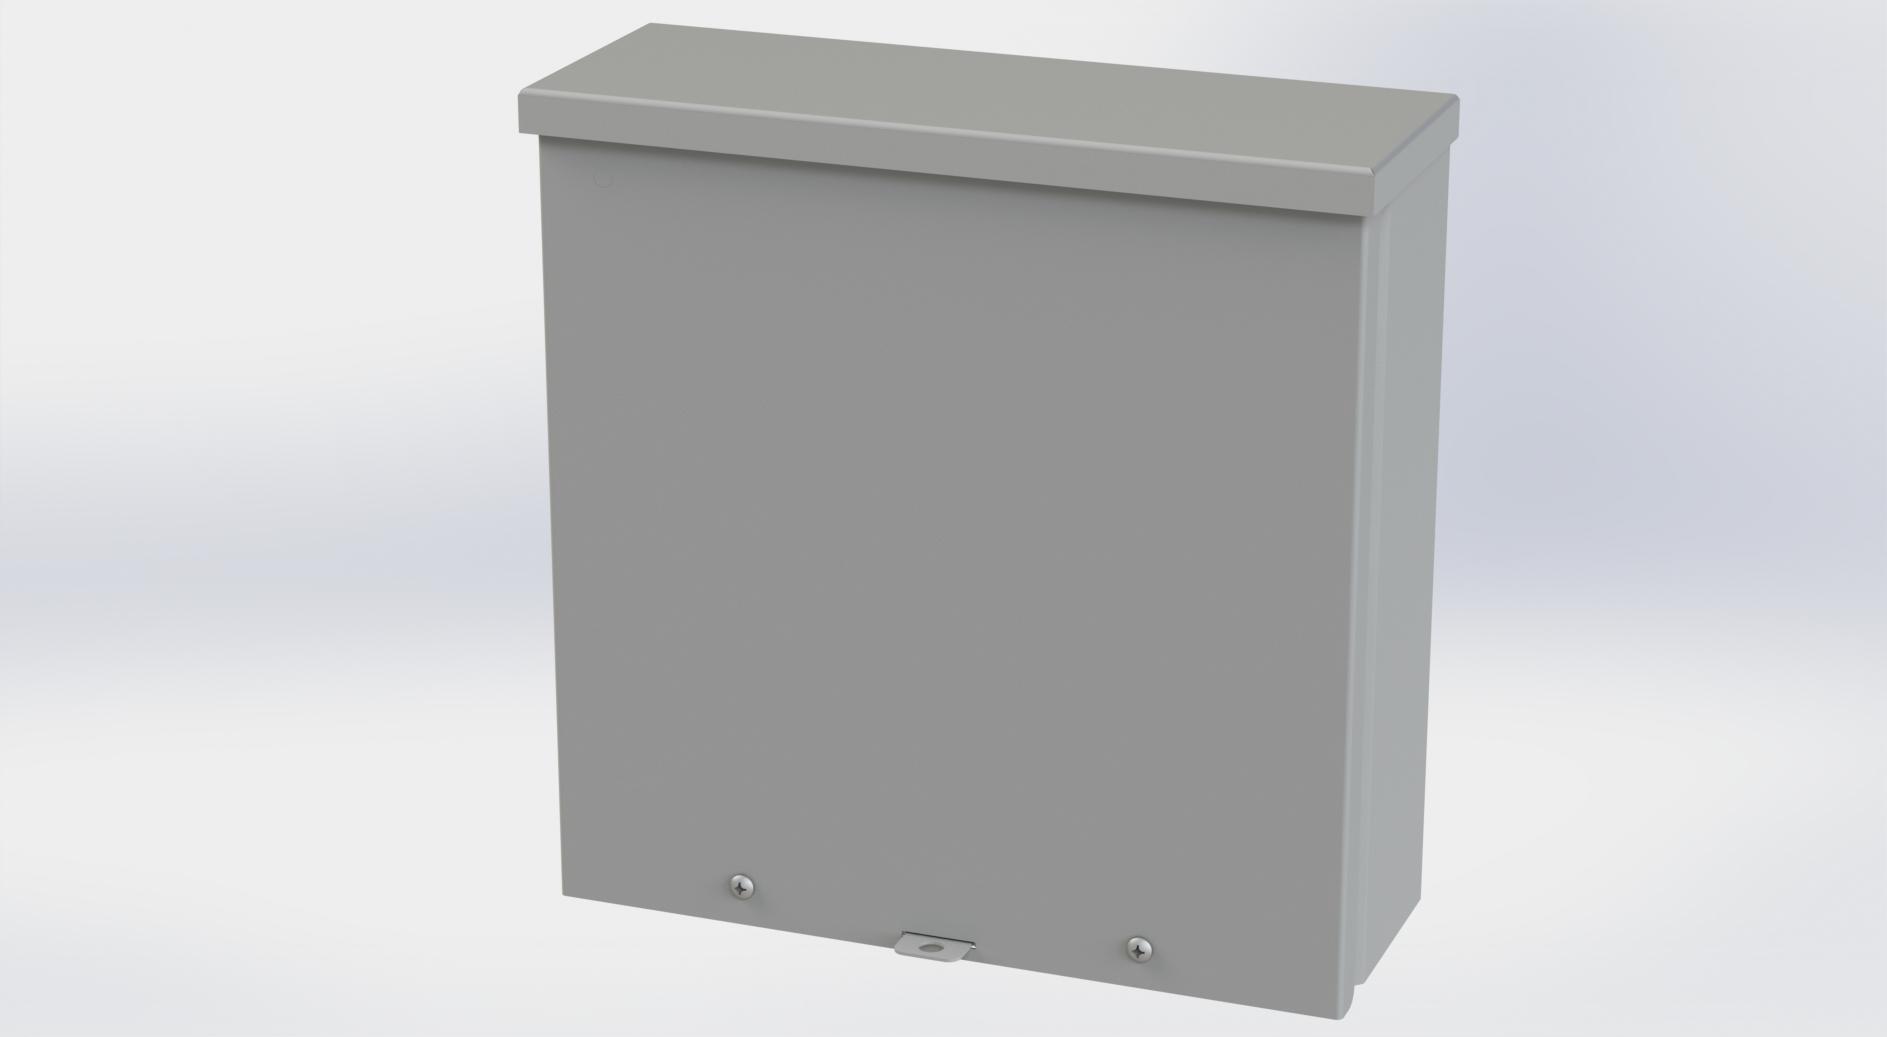 Saginaw Control SCE-12R124 Type-3R Screw Cover Enclosure, Height:12.00", Width:12.00", Depth:4.00", ANSI-61 gray powder coating inside and out.